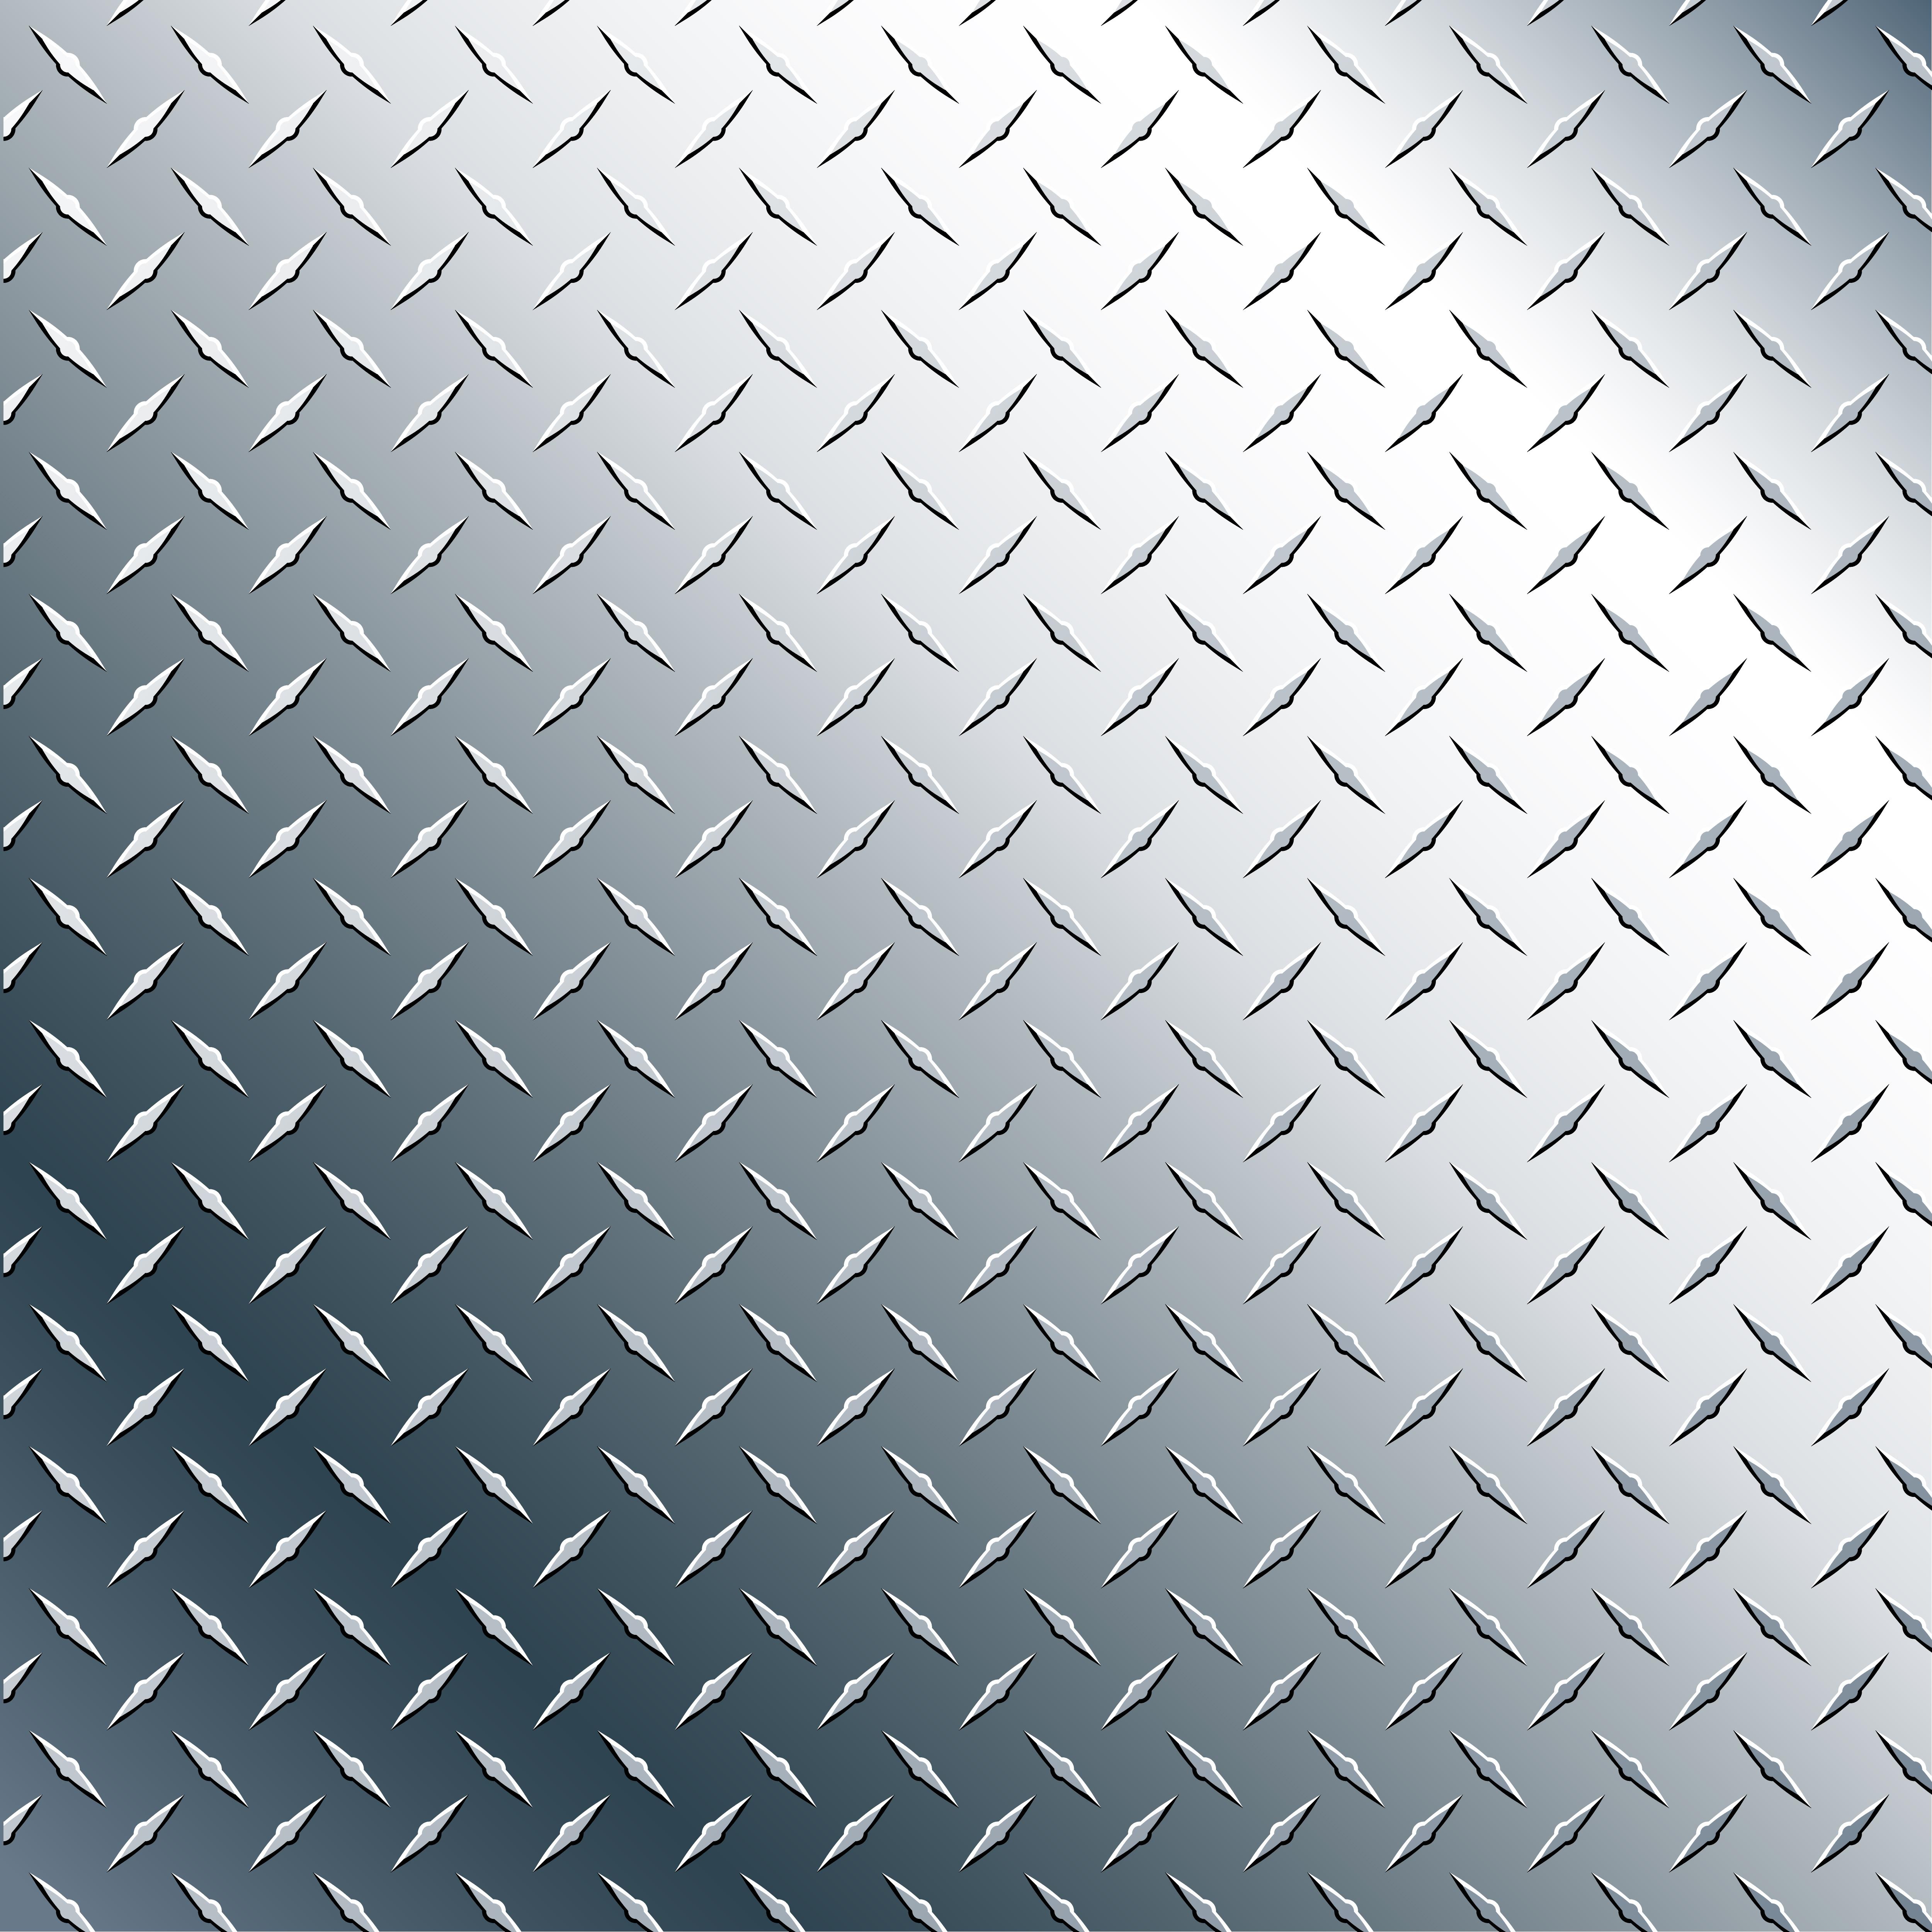 Chrome Background Free Vector Art - (613 Free Downloads)